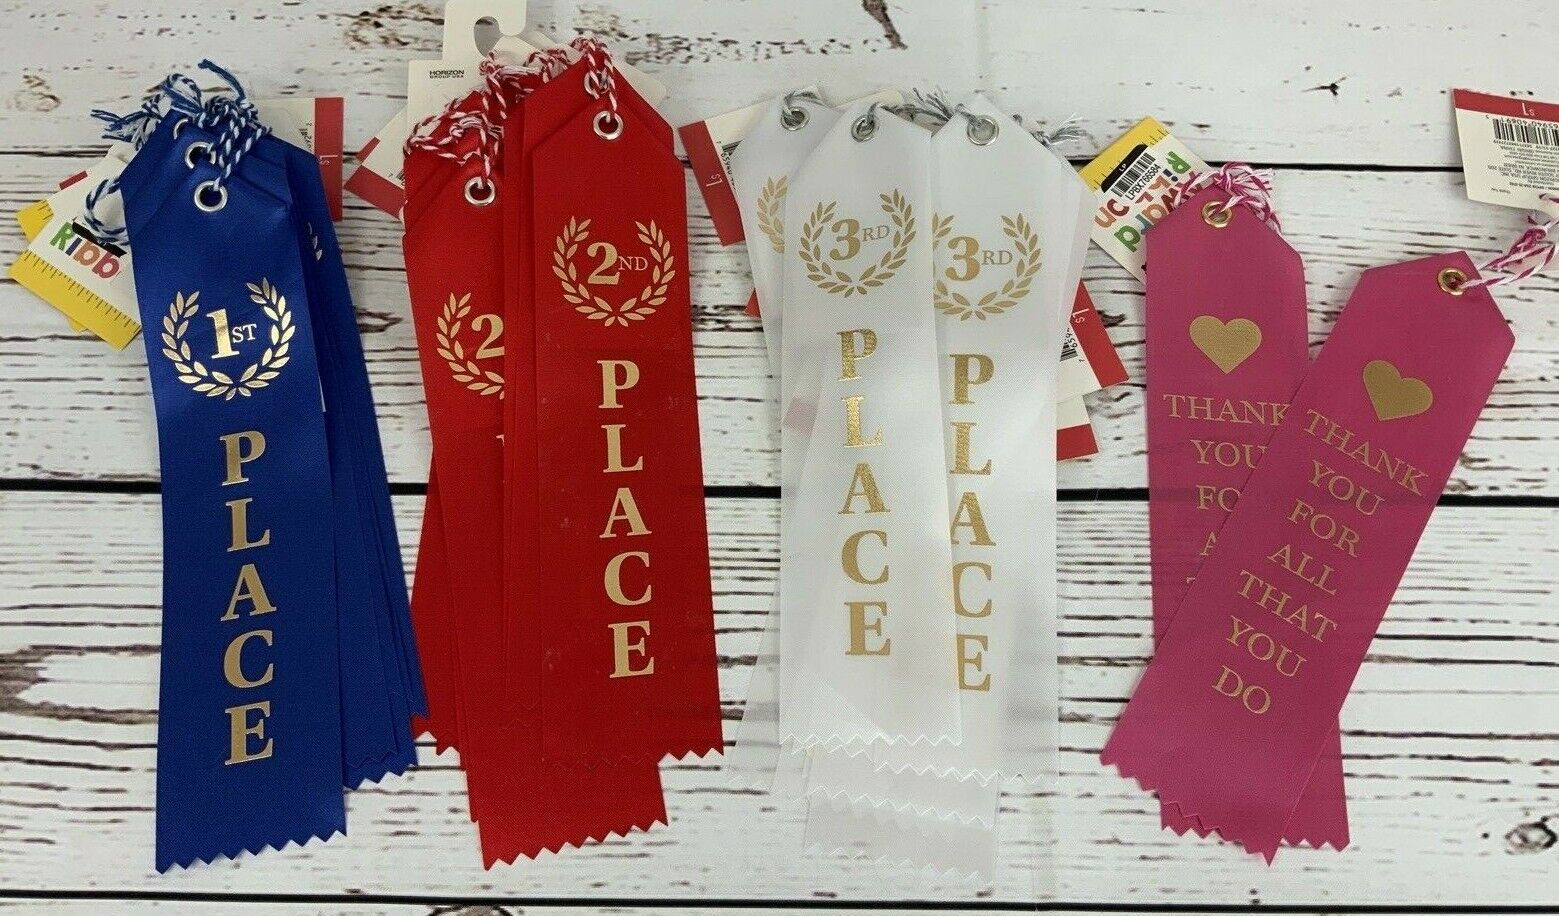 Award Ribbon Lot 7-1st Place 10-2nd Place 11- 3rd Place 2- Thank you 3053 Does not apply